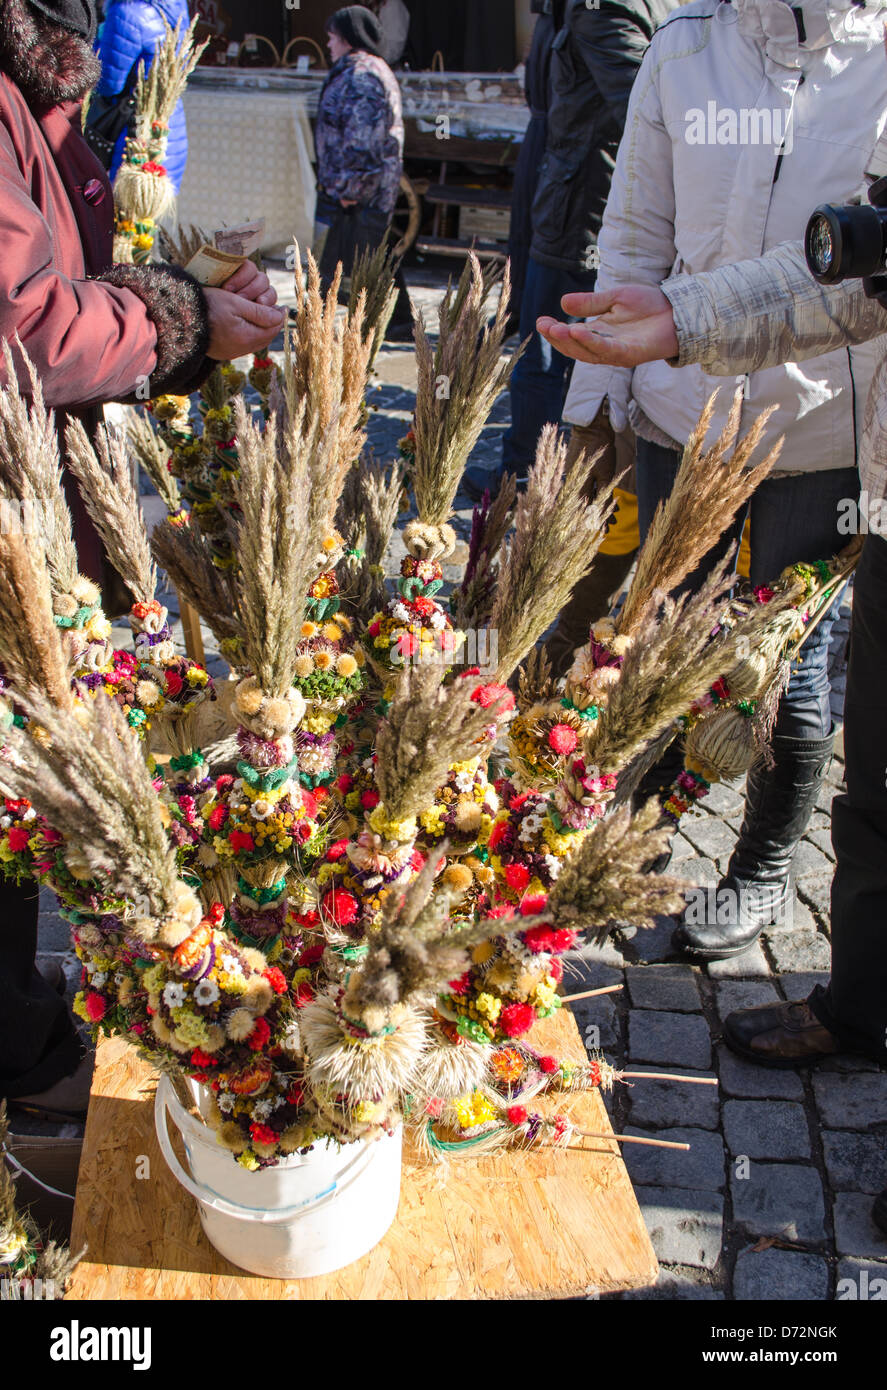 people buy traditional floral natural palm decorations for money in outdoor spring market fair event. Stock Photo